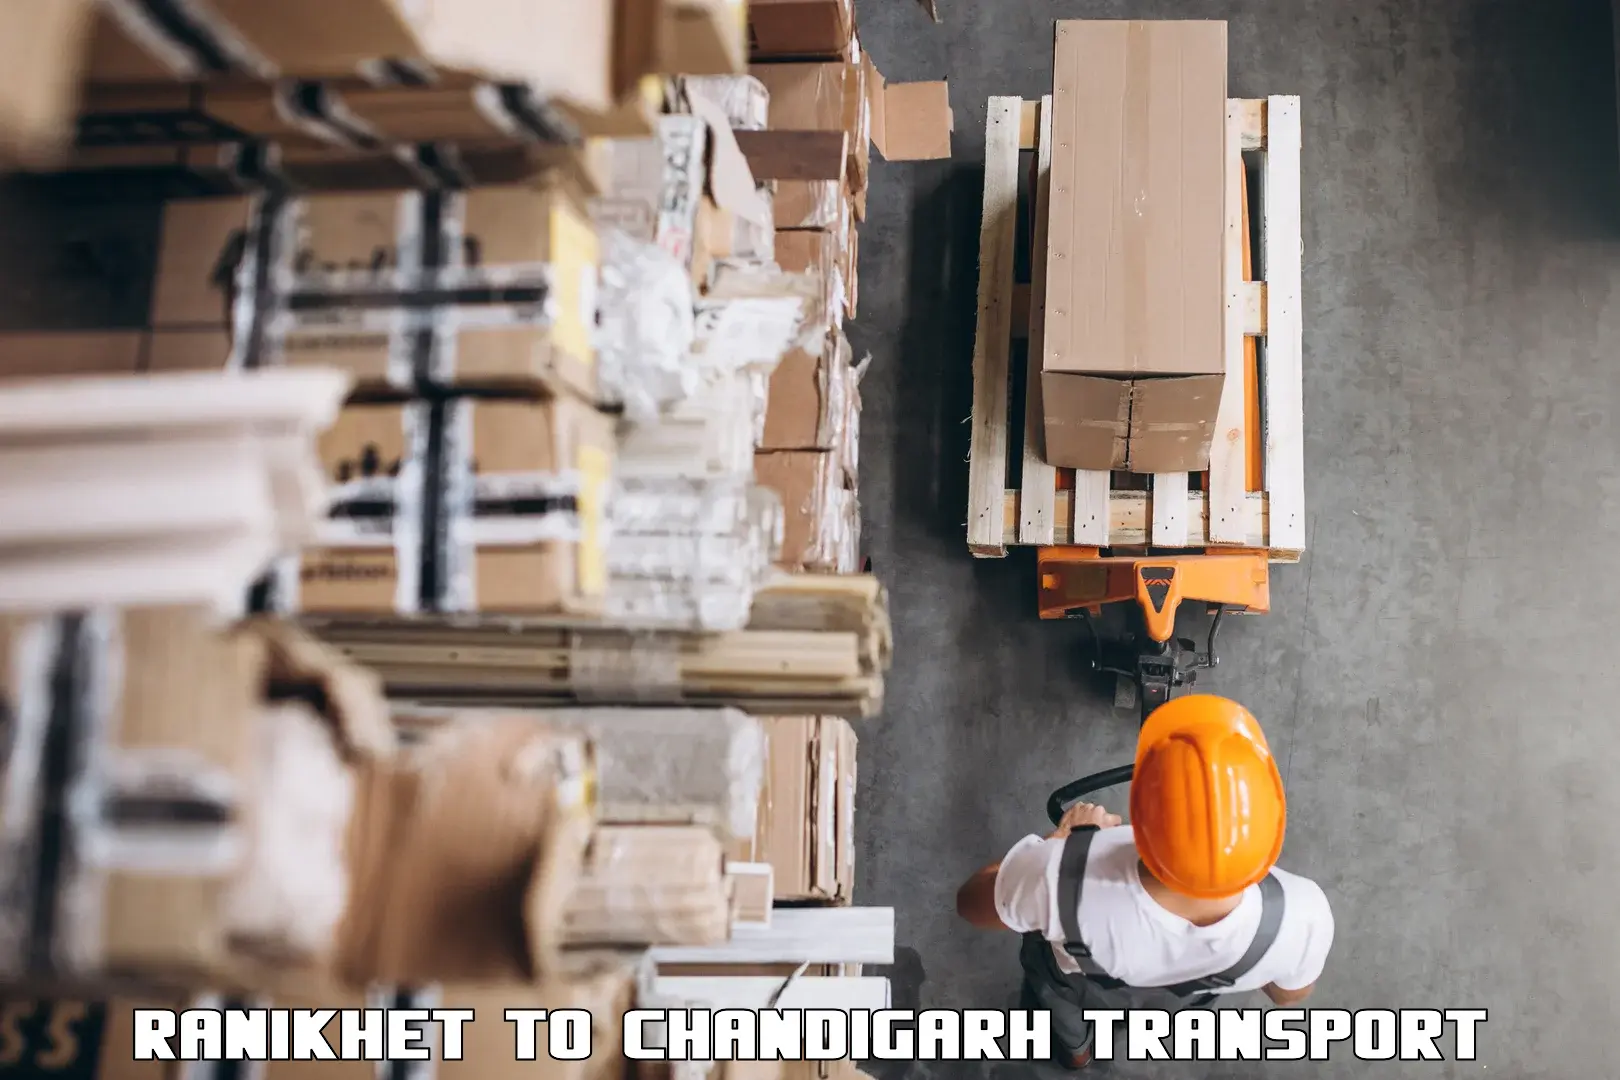 Container transport service Ranikhet to Chandigarh